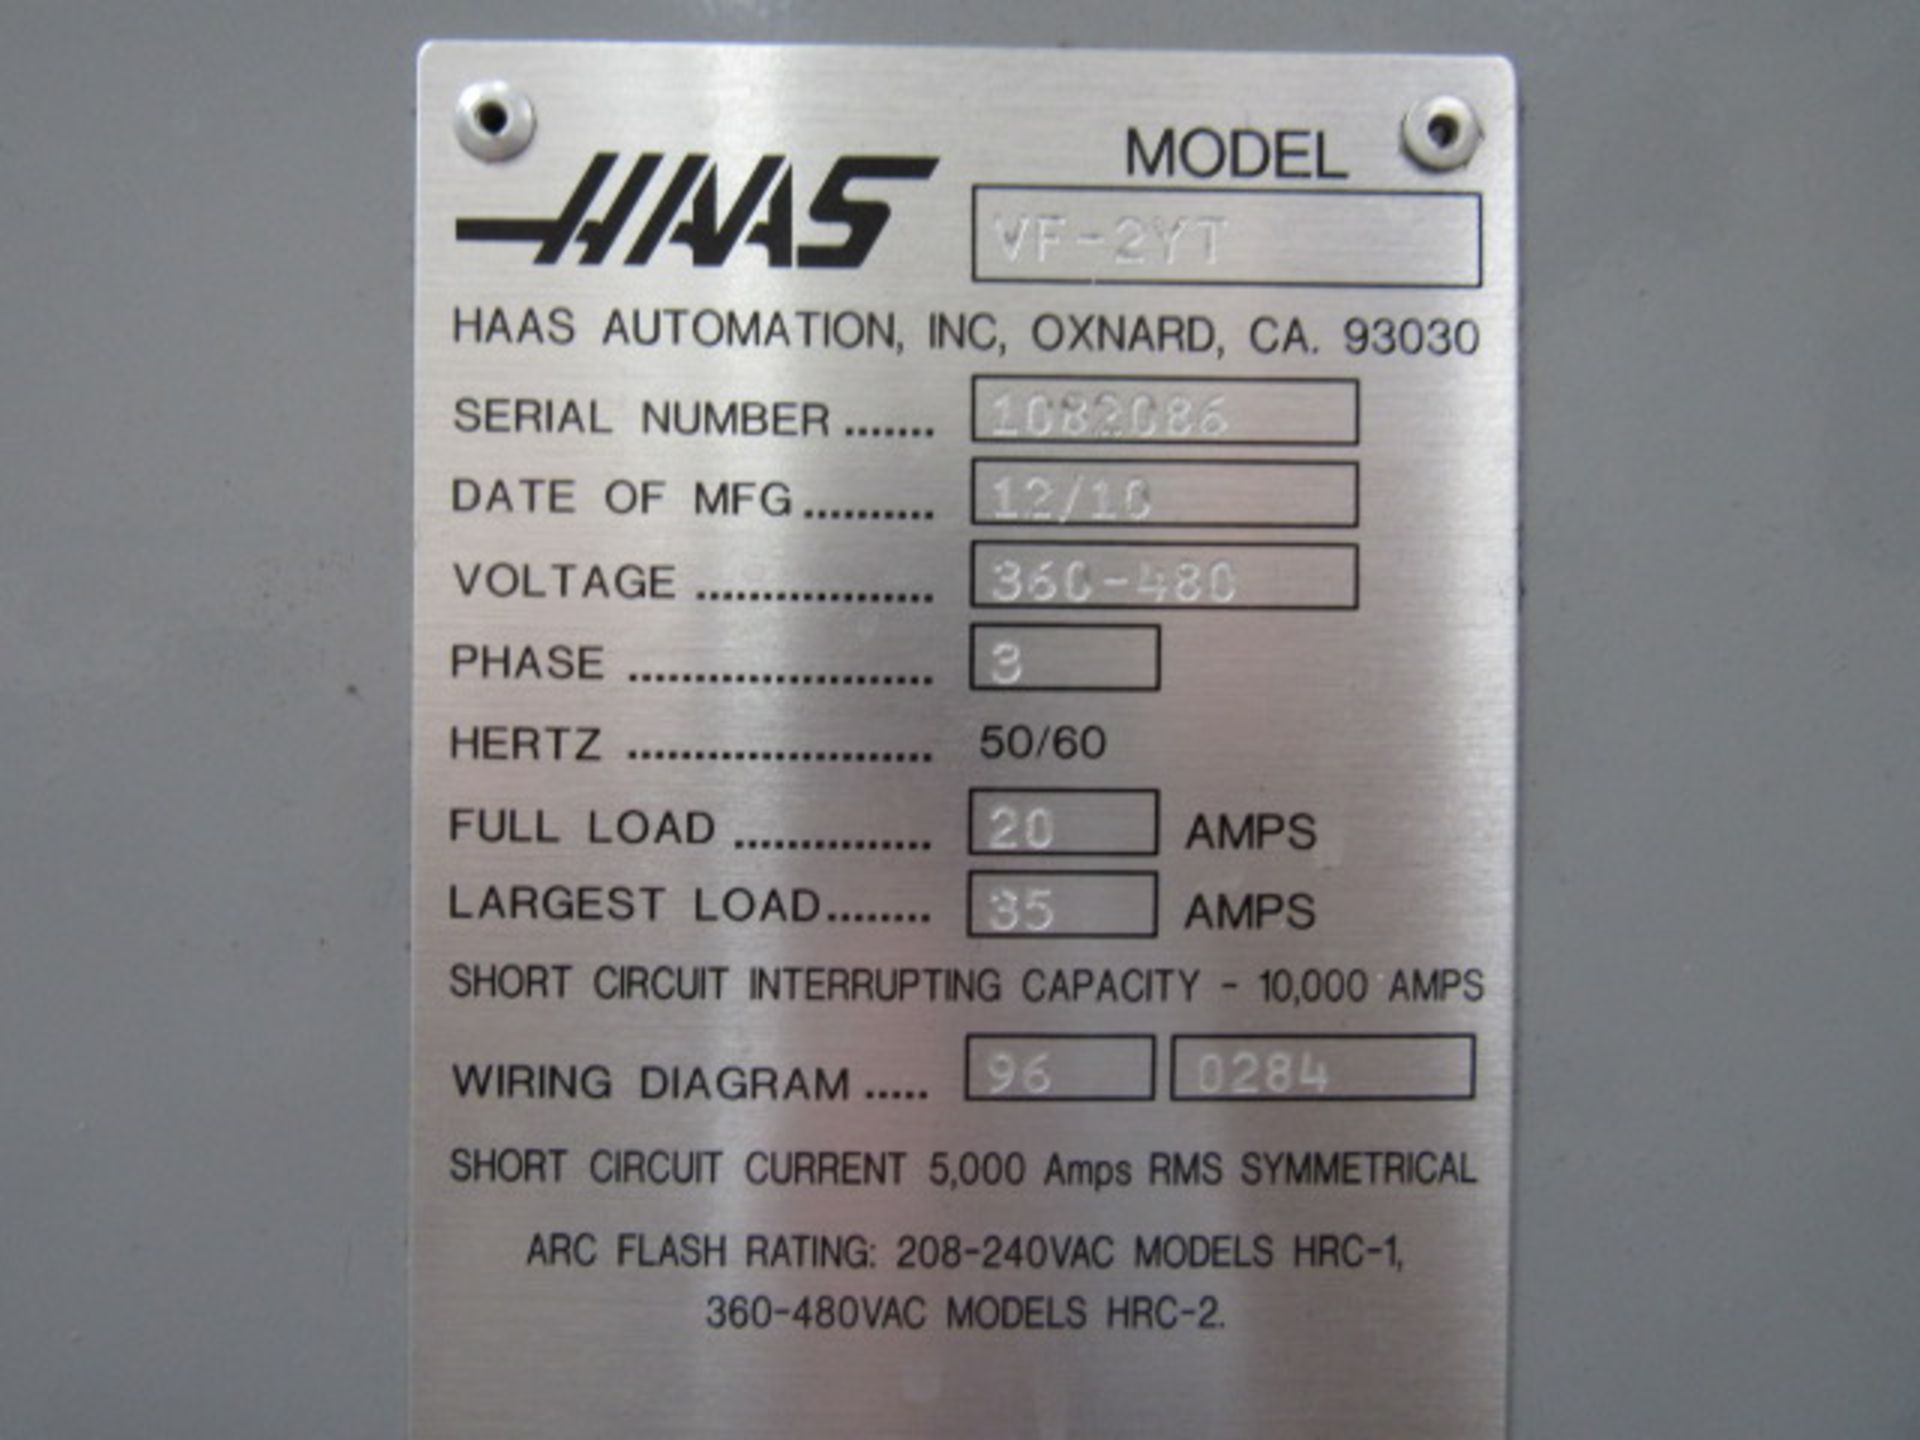 Haas VF-2YT Extended Travel CNC Vertical Machining Center - Image 7 of 8